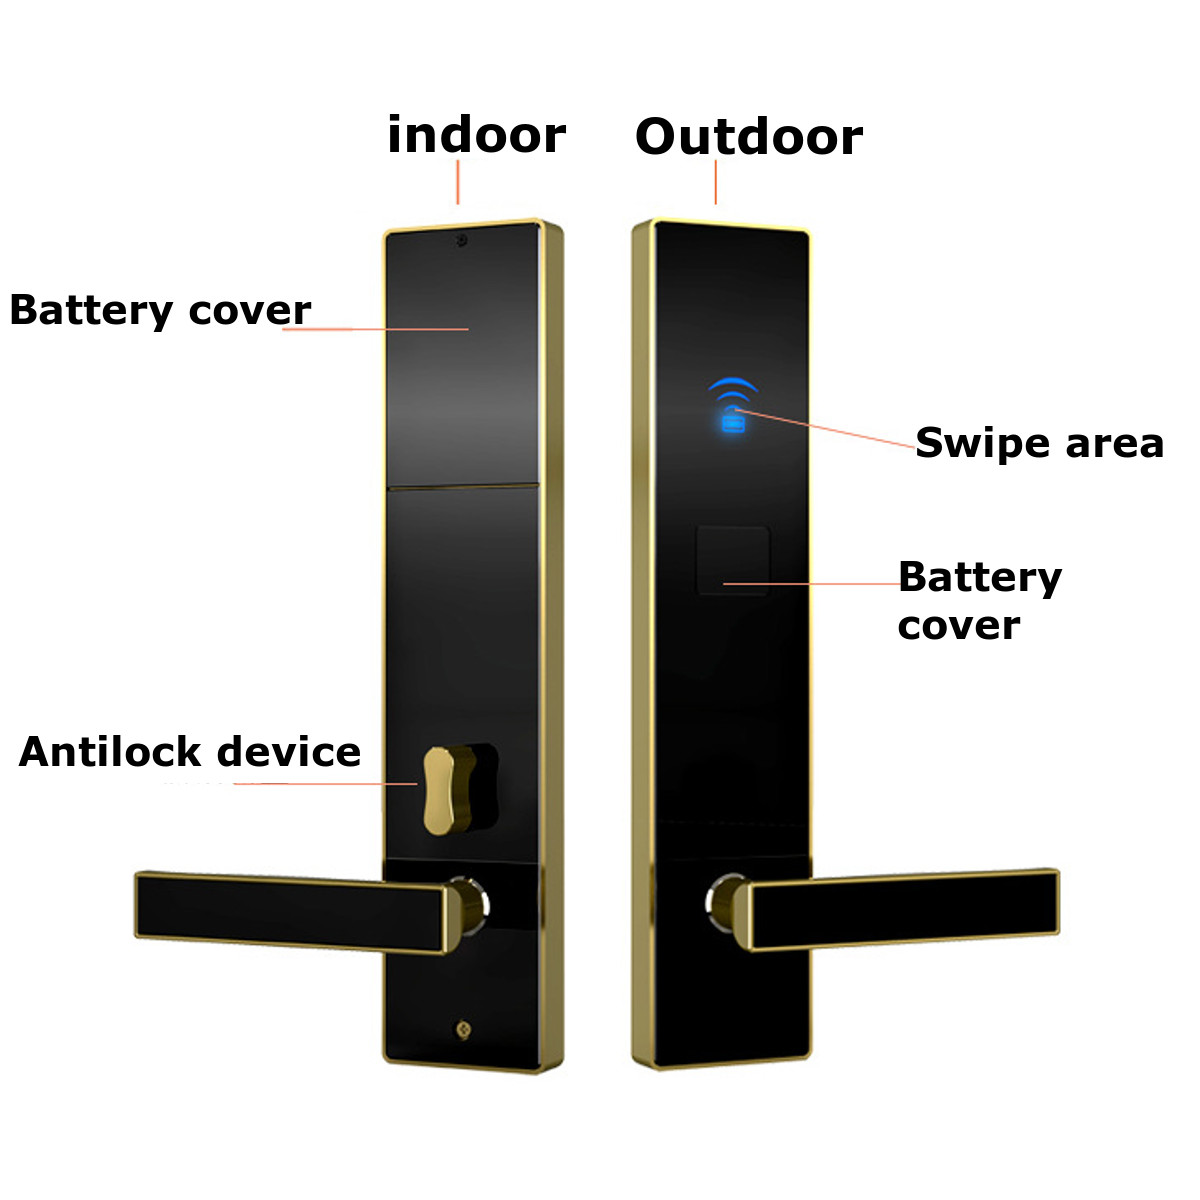 Security-Electronic-Smart-Door-Lock-Key-and-Card-2-Way-Safe-Home-Entry-Tools-1629088